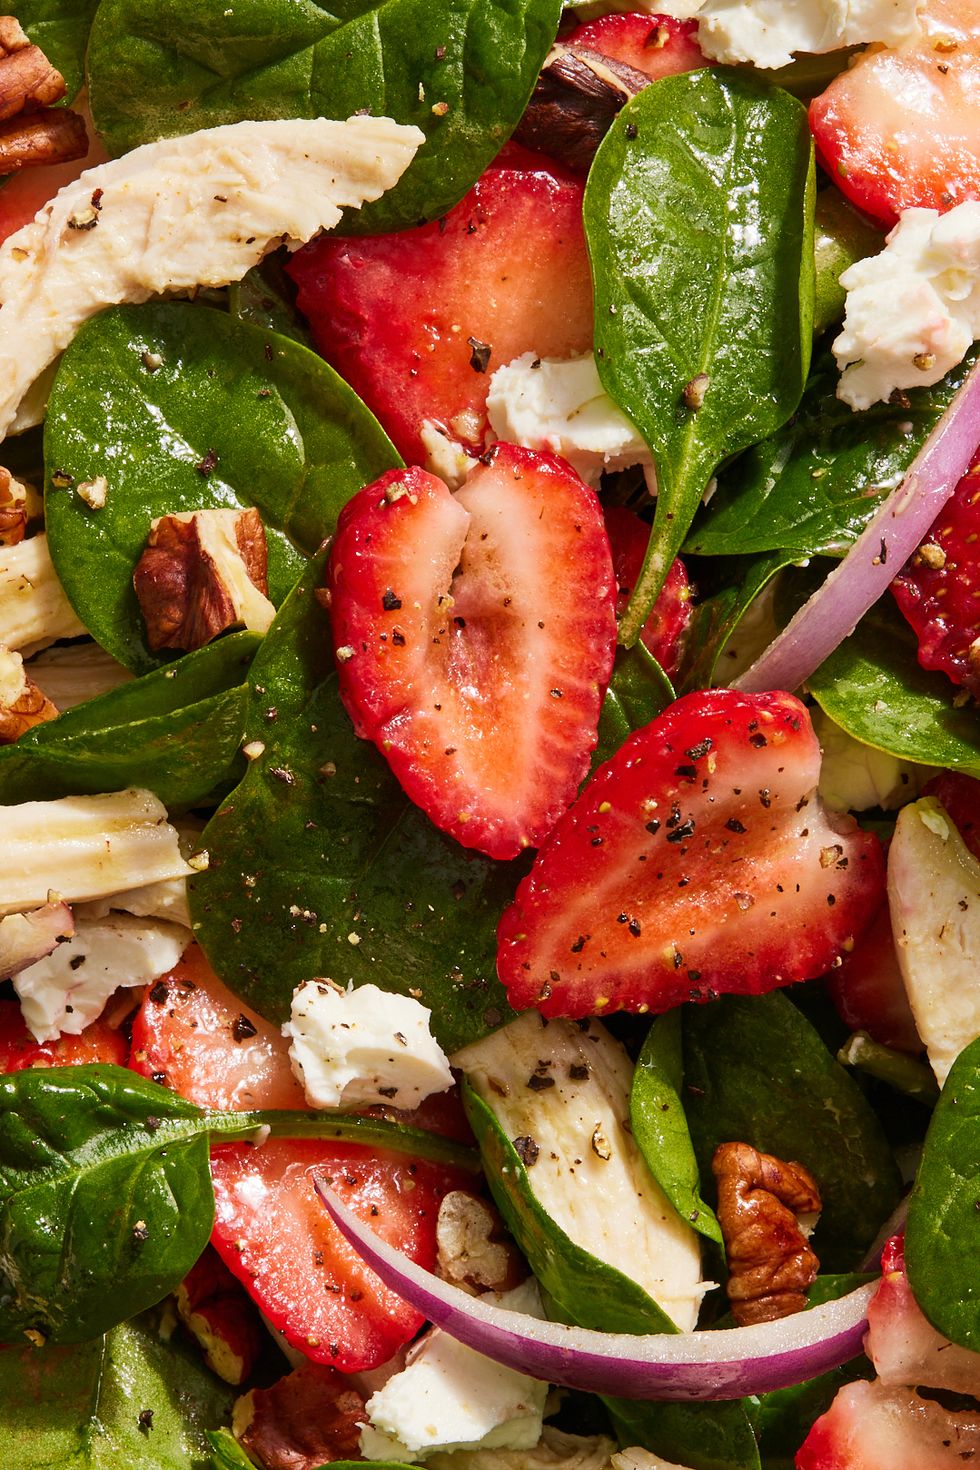 https://hips.hearstapps.com/hmg-prod/images/strawberry-spinach-salad-secondary-6408a96b85f67.jpg?crop=0.6666666666666666xw:1xh;center,top&resize=980:*